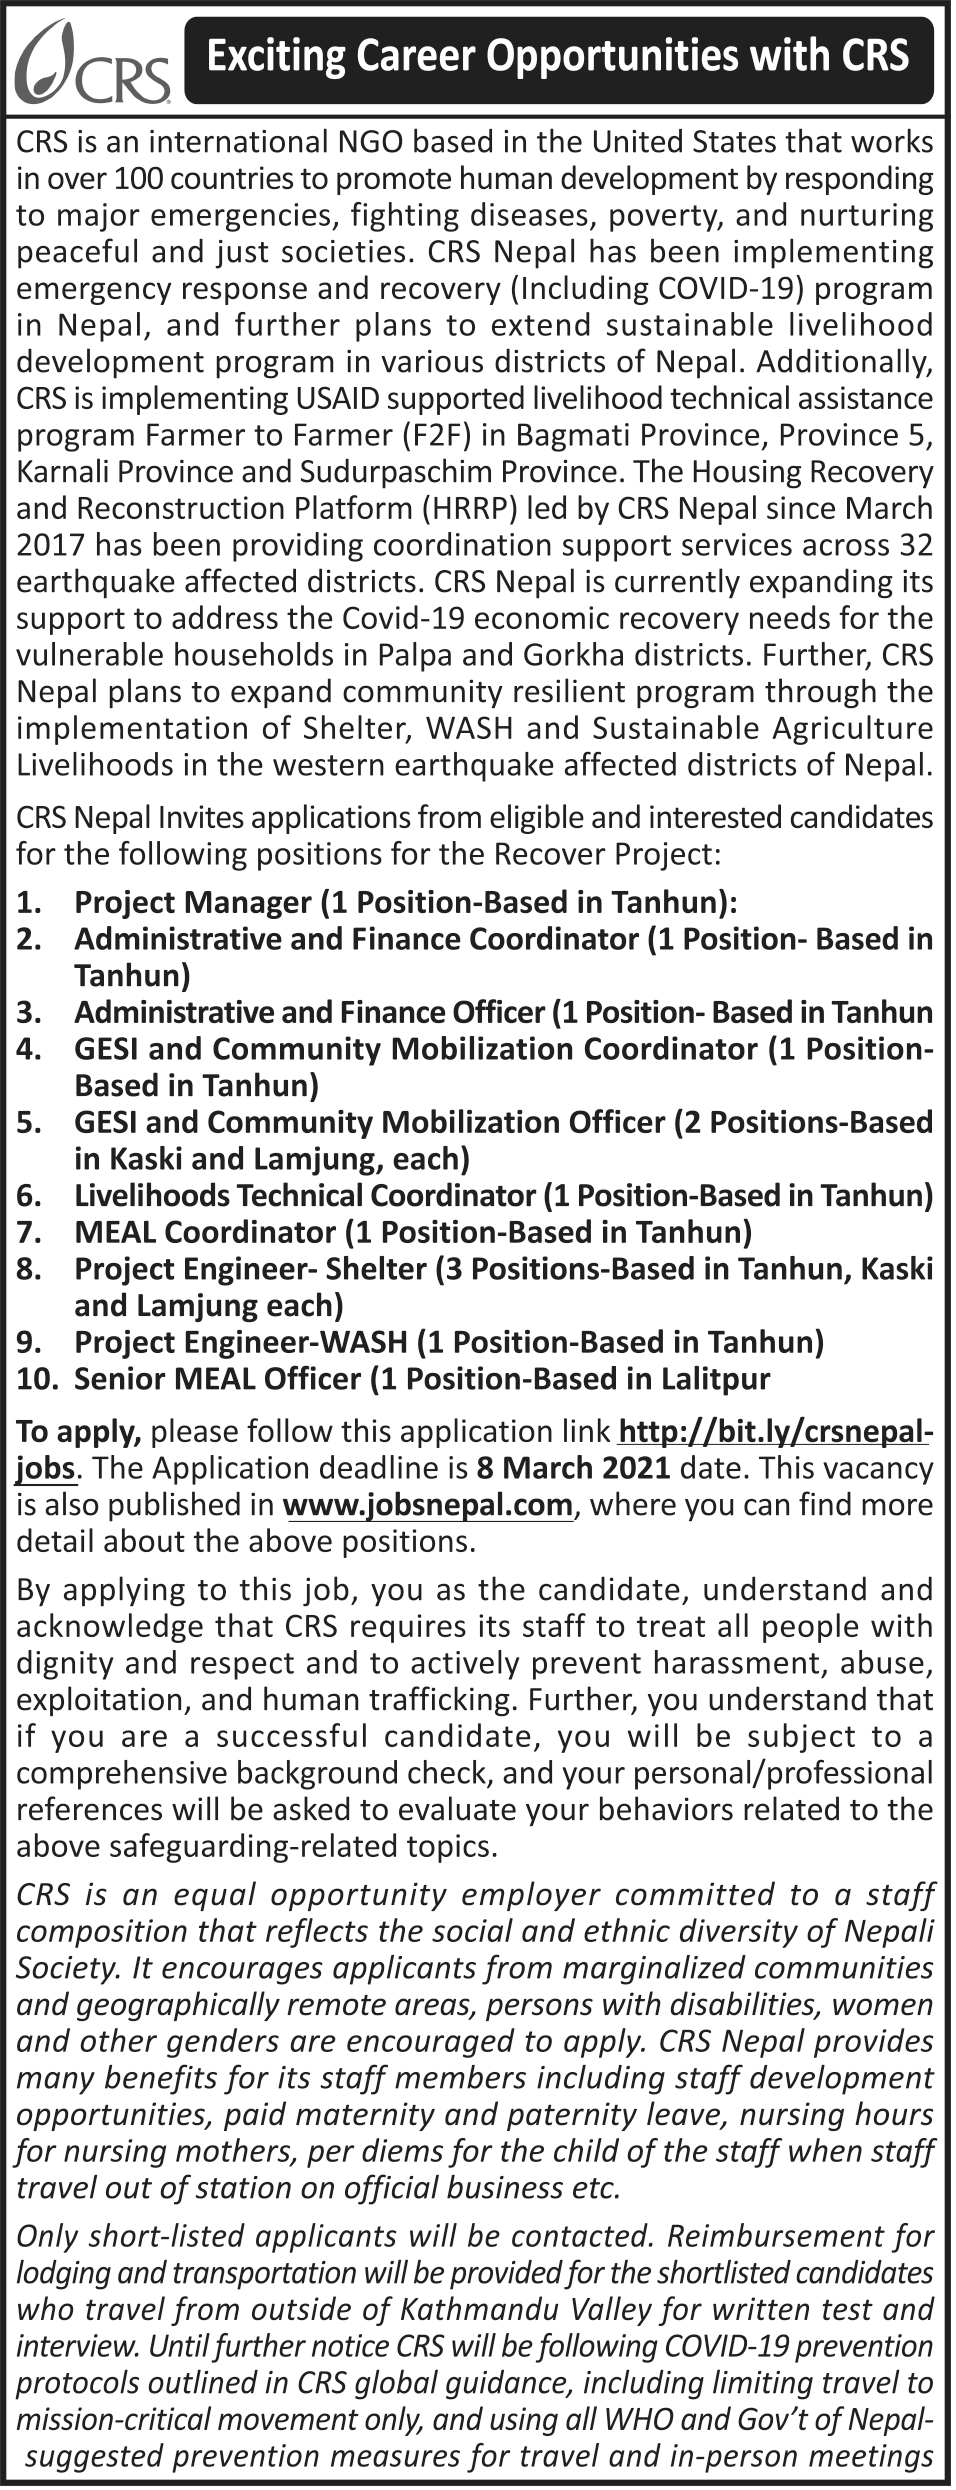 Career Opportunity at CRS